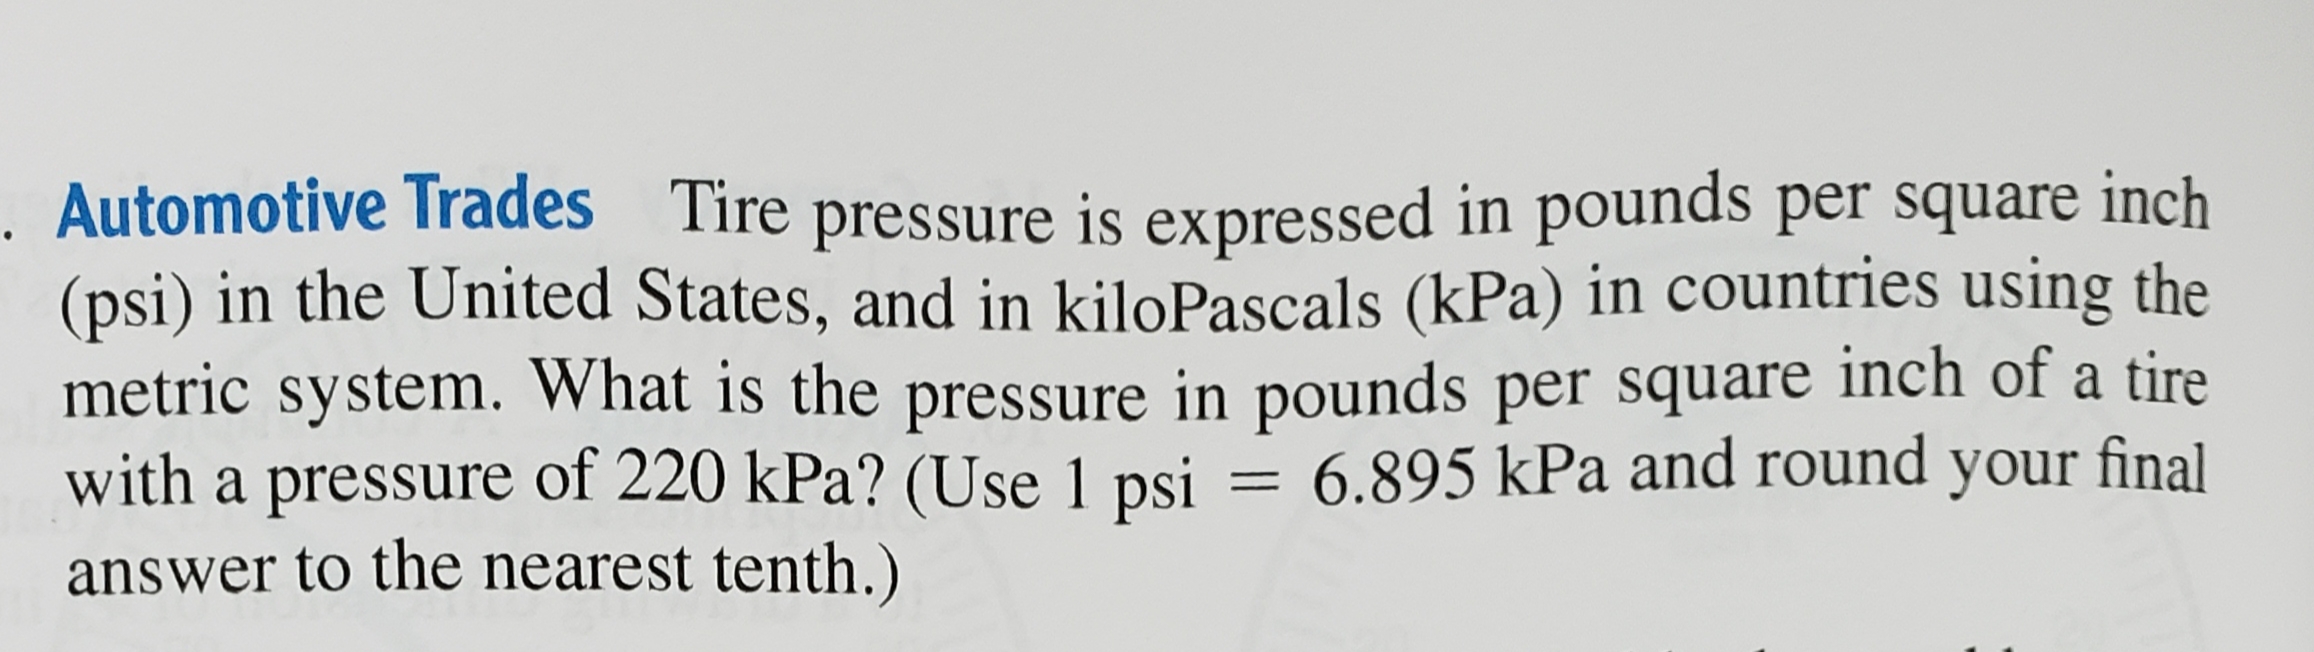 Automotive Trades Tire pressure is expressed in pounds per square inch
(psi) in the United States, and in kiloPascals (kPa) in countries using the
metric system. What is the pressure in pounds per square inch of a tire
with a pressure of 220 kPa? (Use 1 psi = 6.895 kPa and round your final
answer to the nearest tenth.)
